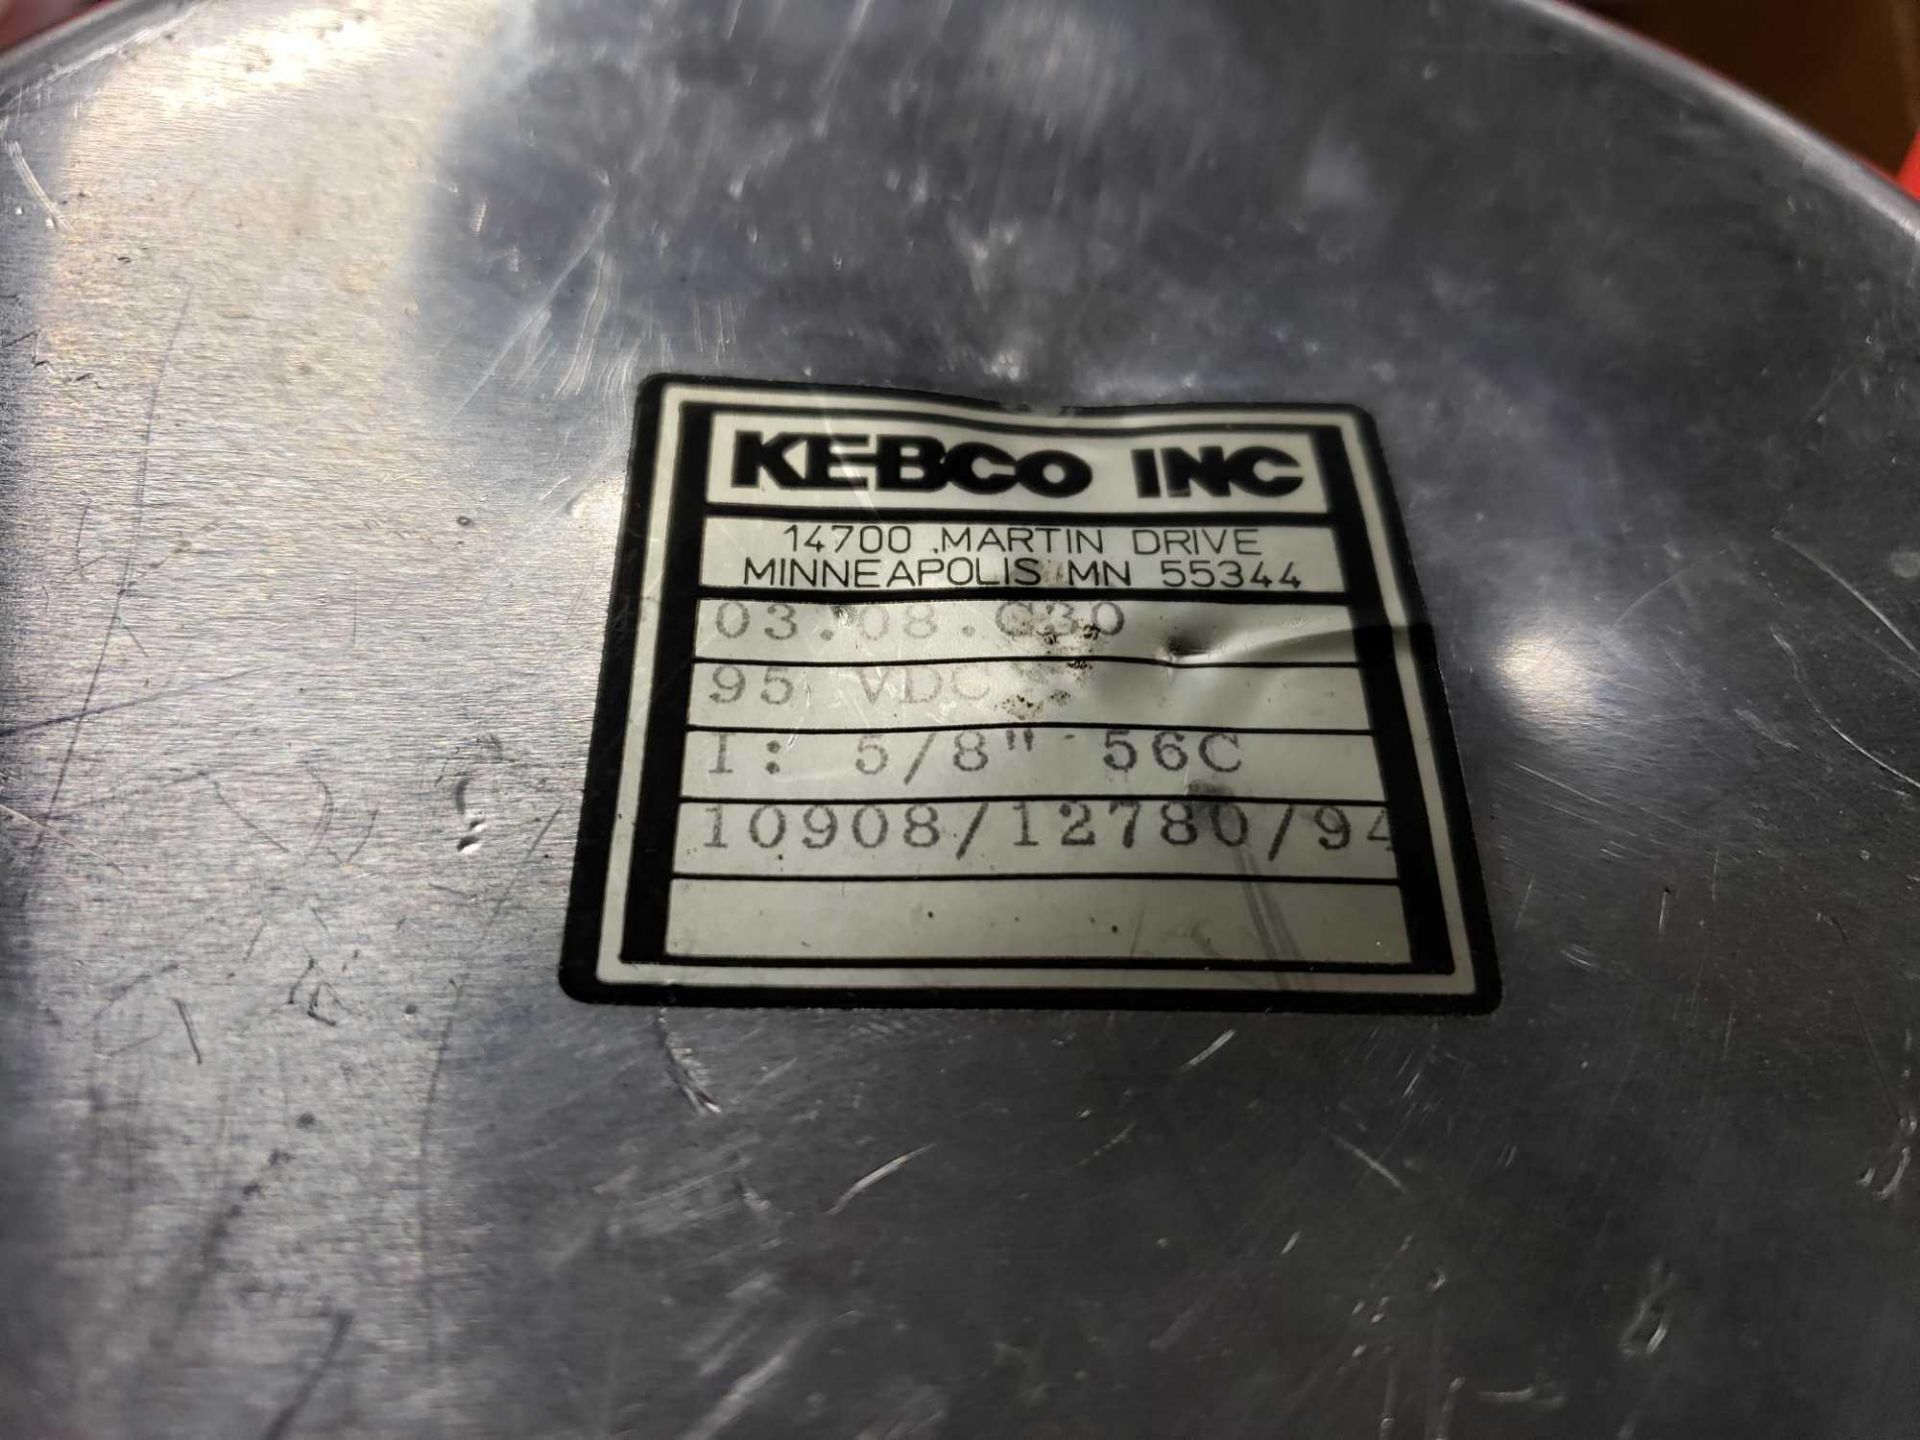 Kebco brake model 04.31.C10. New in box with storage wear. - Image 2 of 3